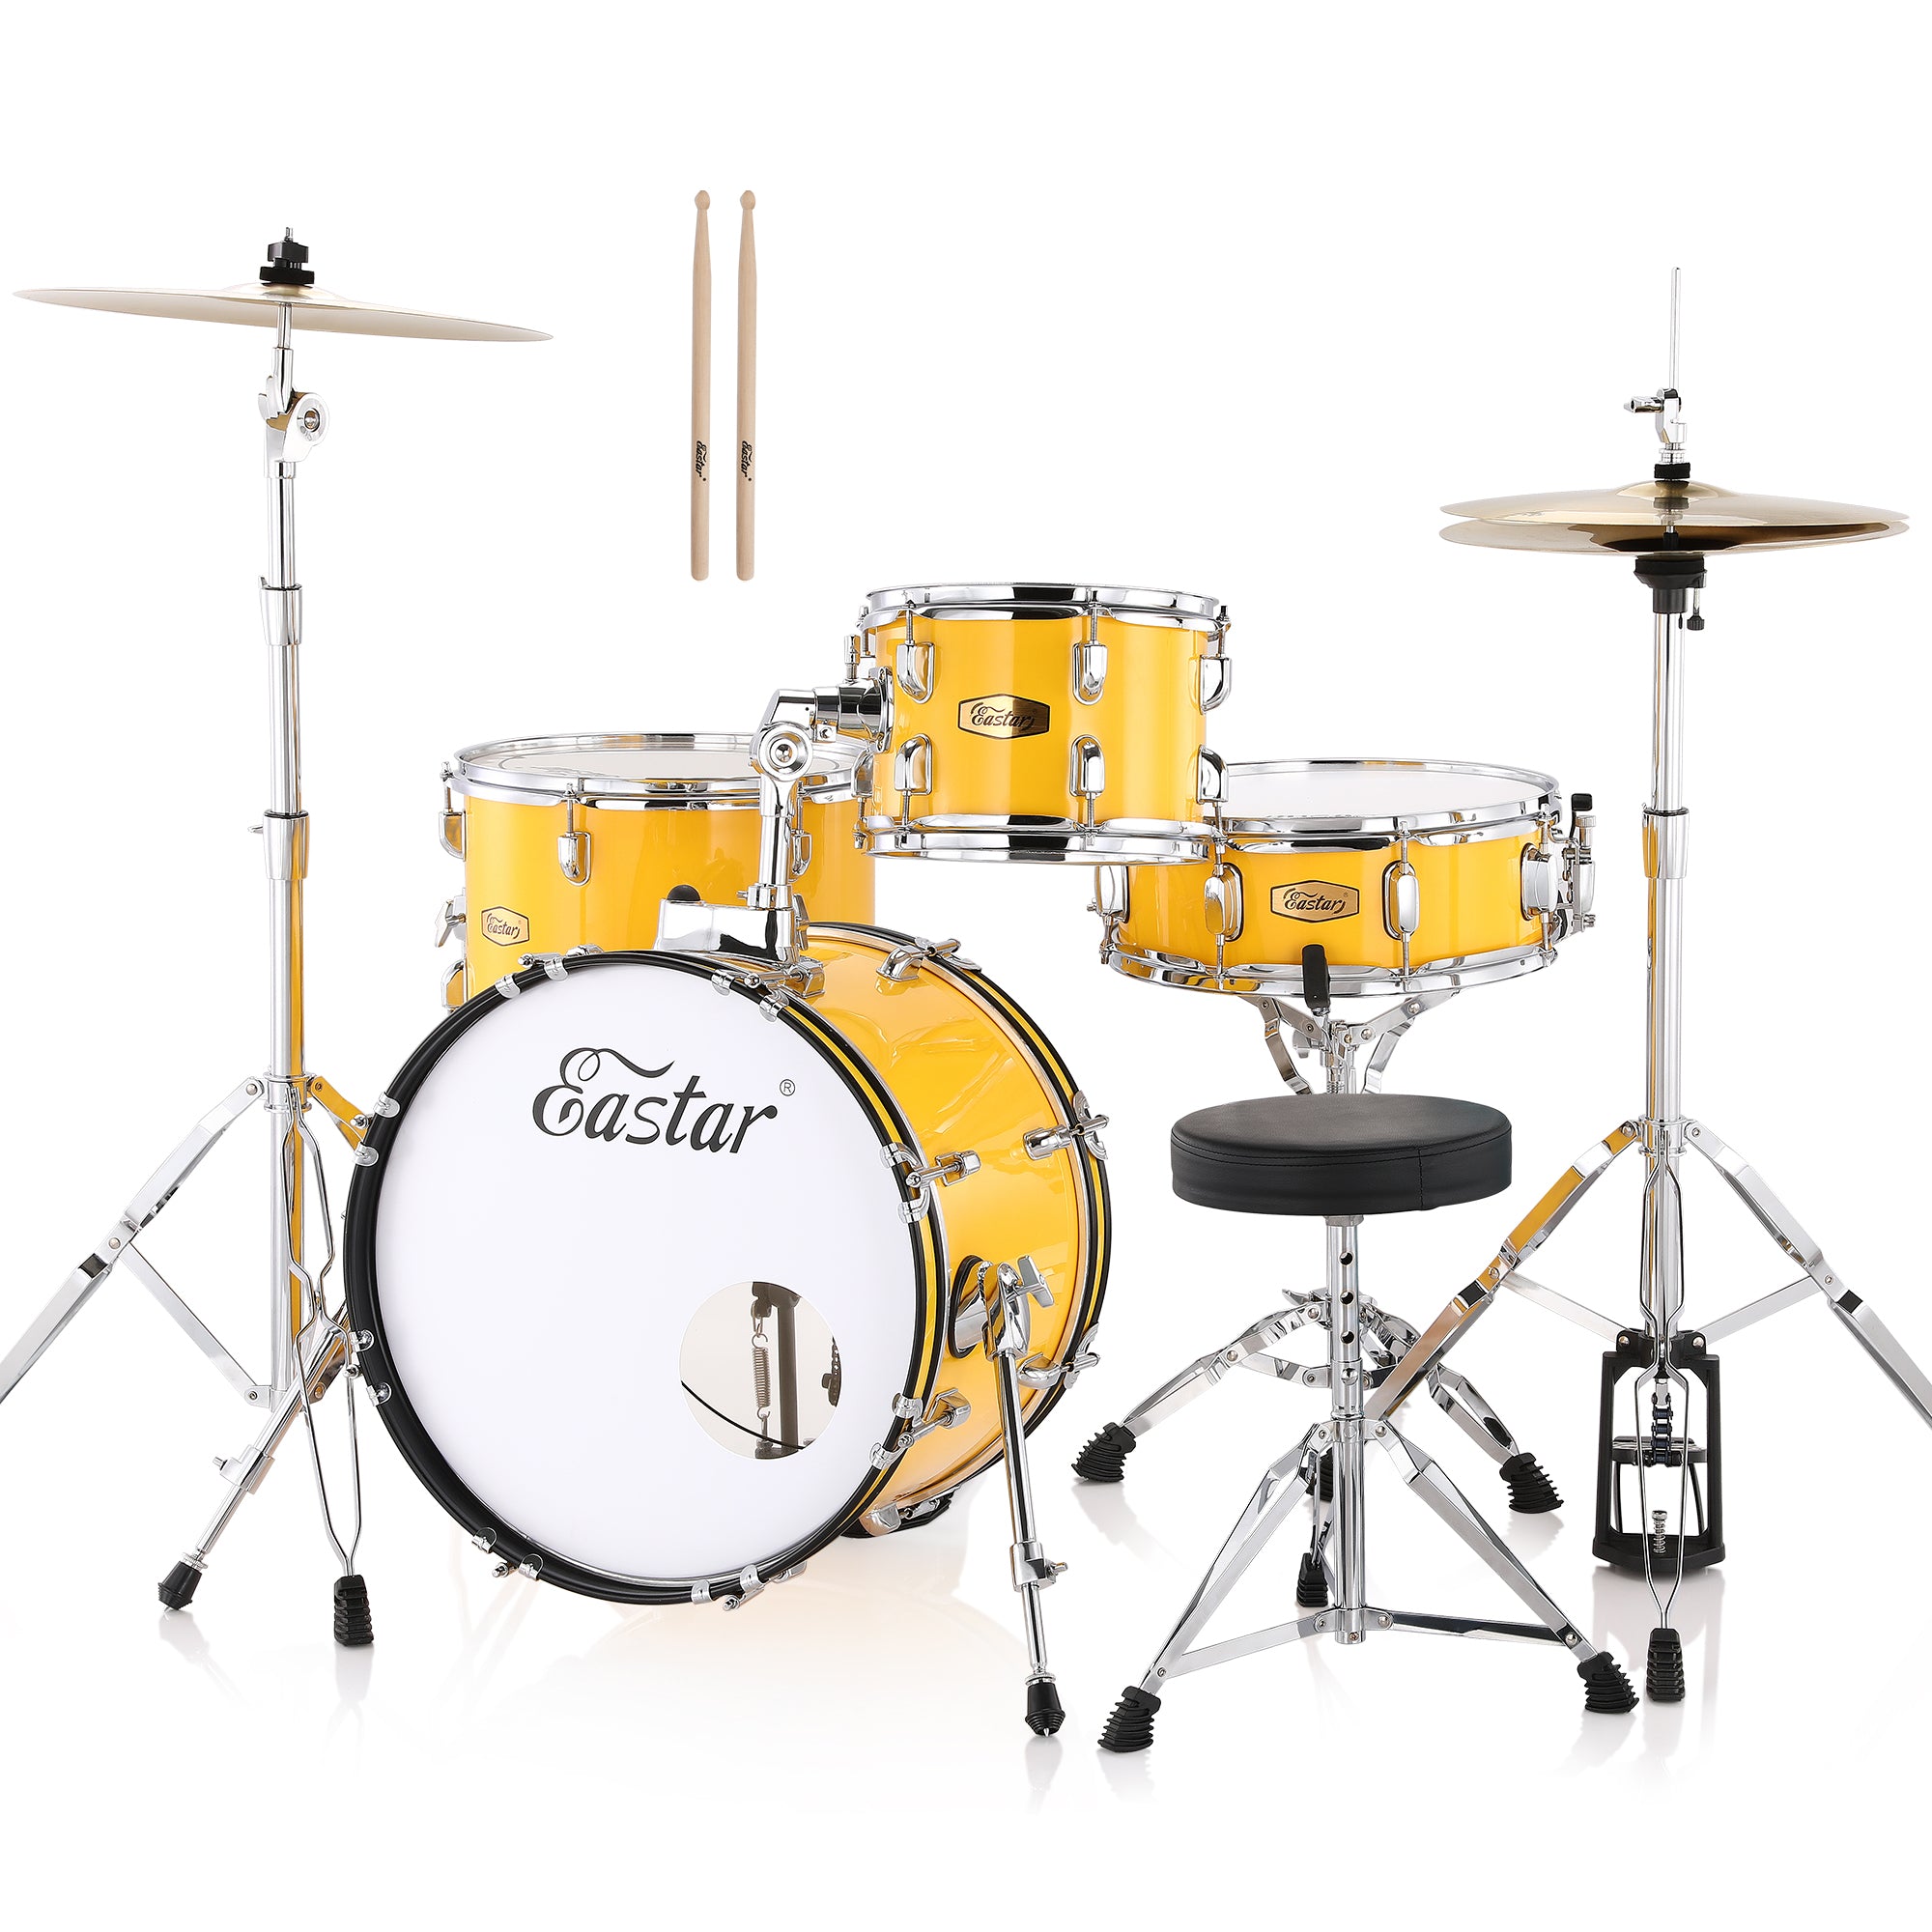 

Eastar EDS-540 18 inch Complete 4-Piece Drum Set 2 Cymbal for Junior Student